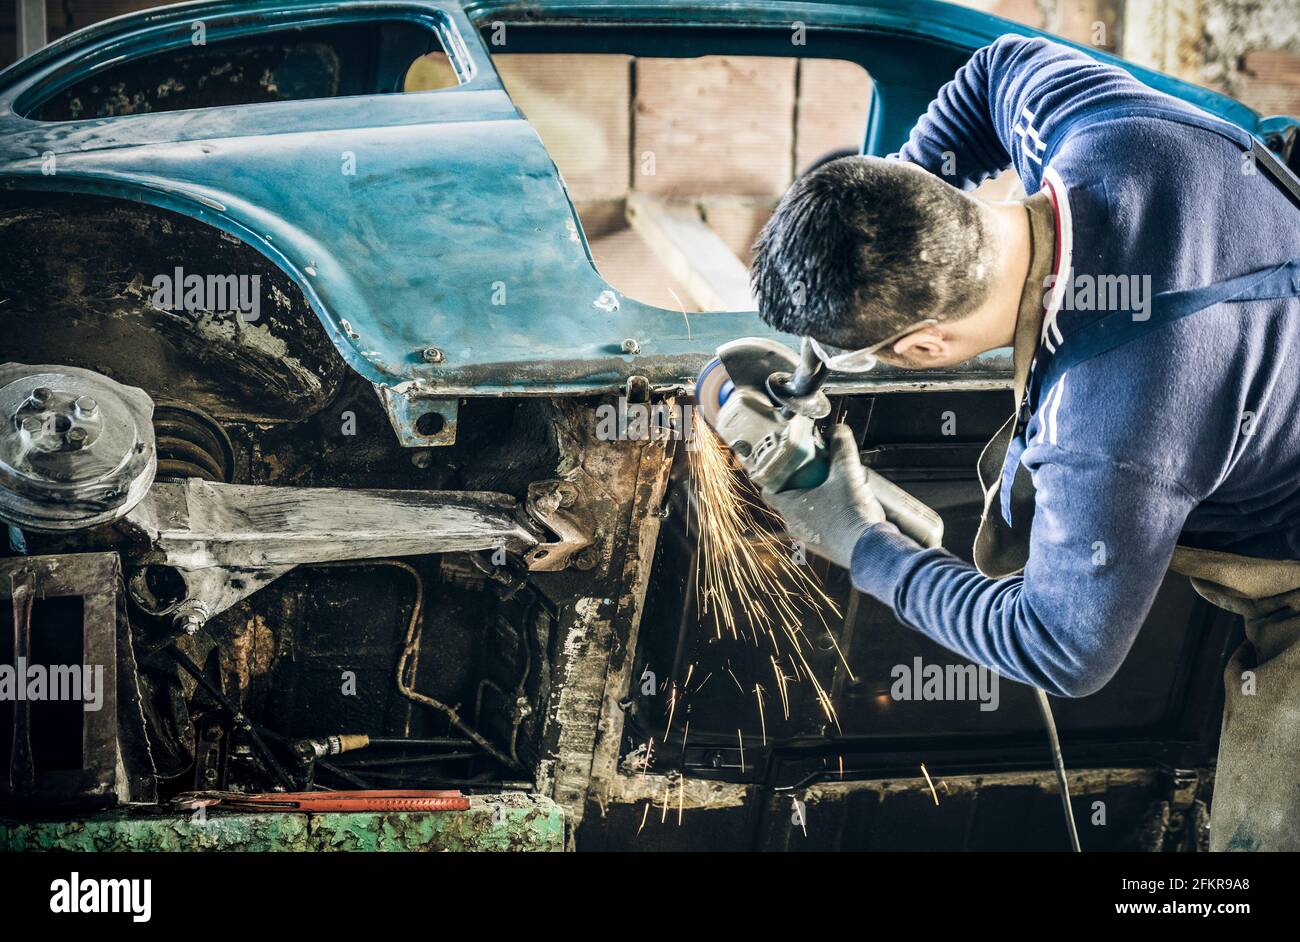 Young man mechanical worker repairing old vintage car body with electric grider in messy garage - Work safety with protection wear - Niche expertise Stock Photo